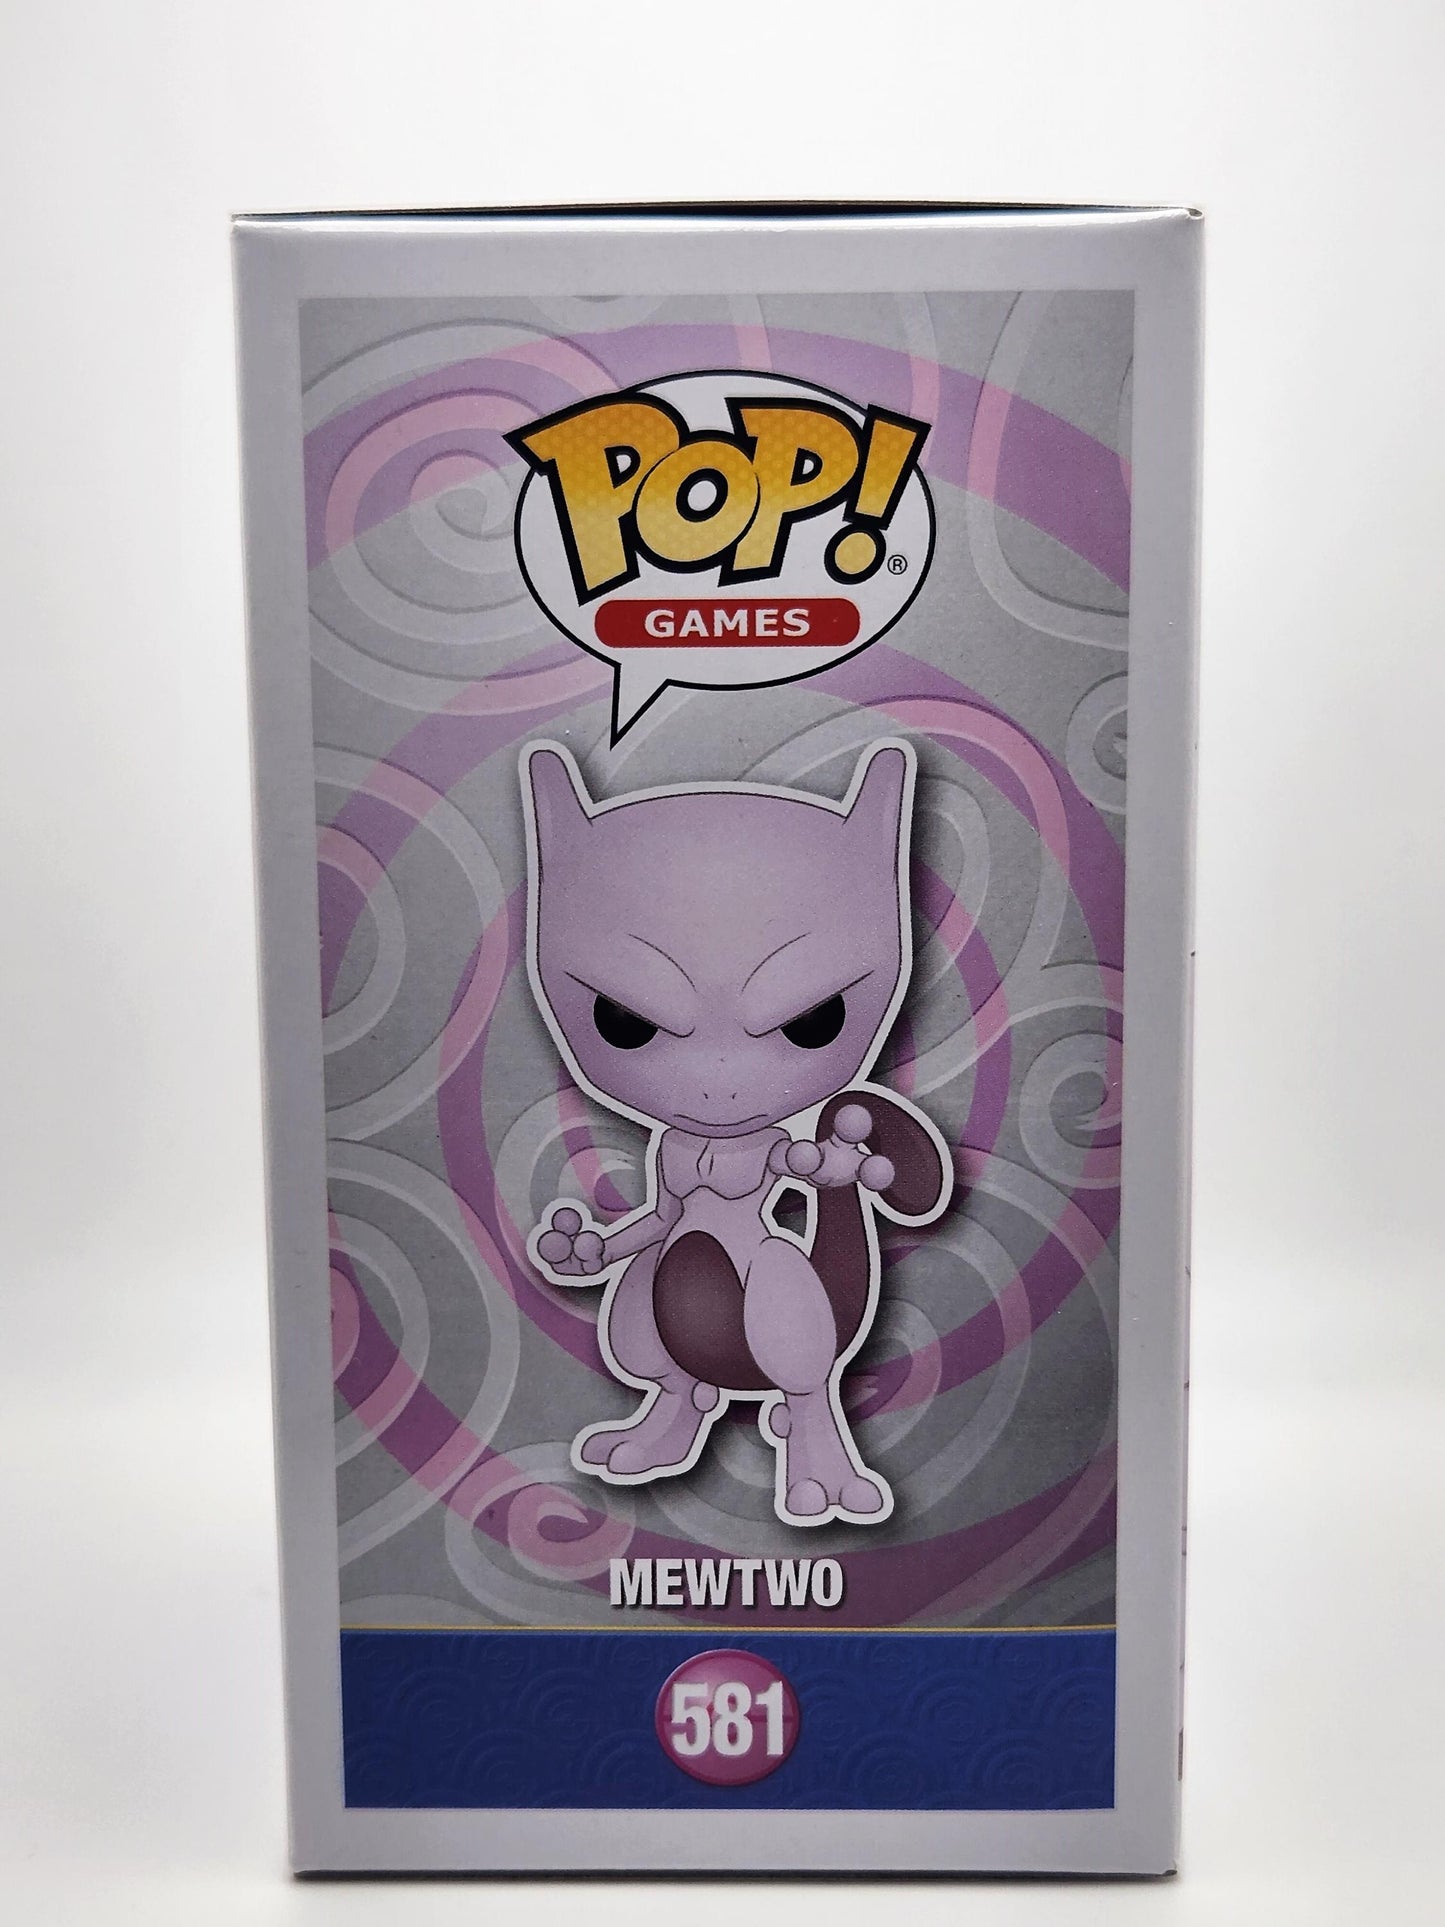 Mewtwo - #581 - Box Condition 9/10